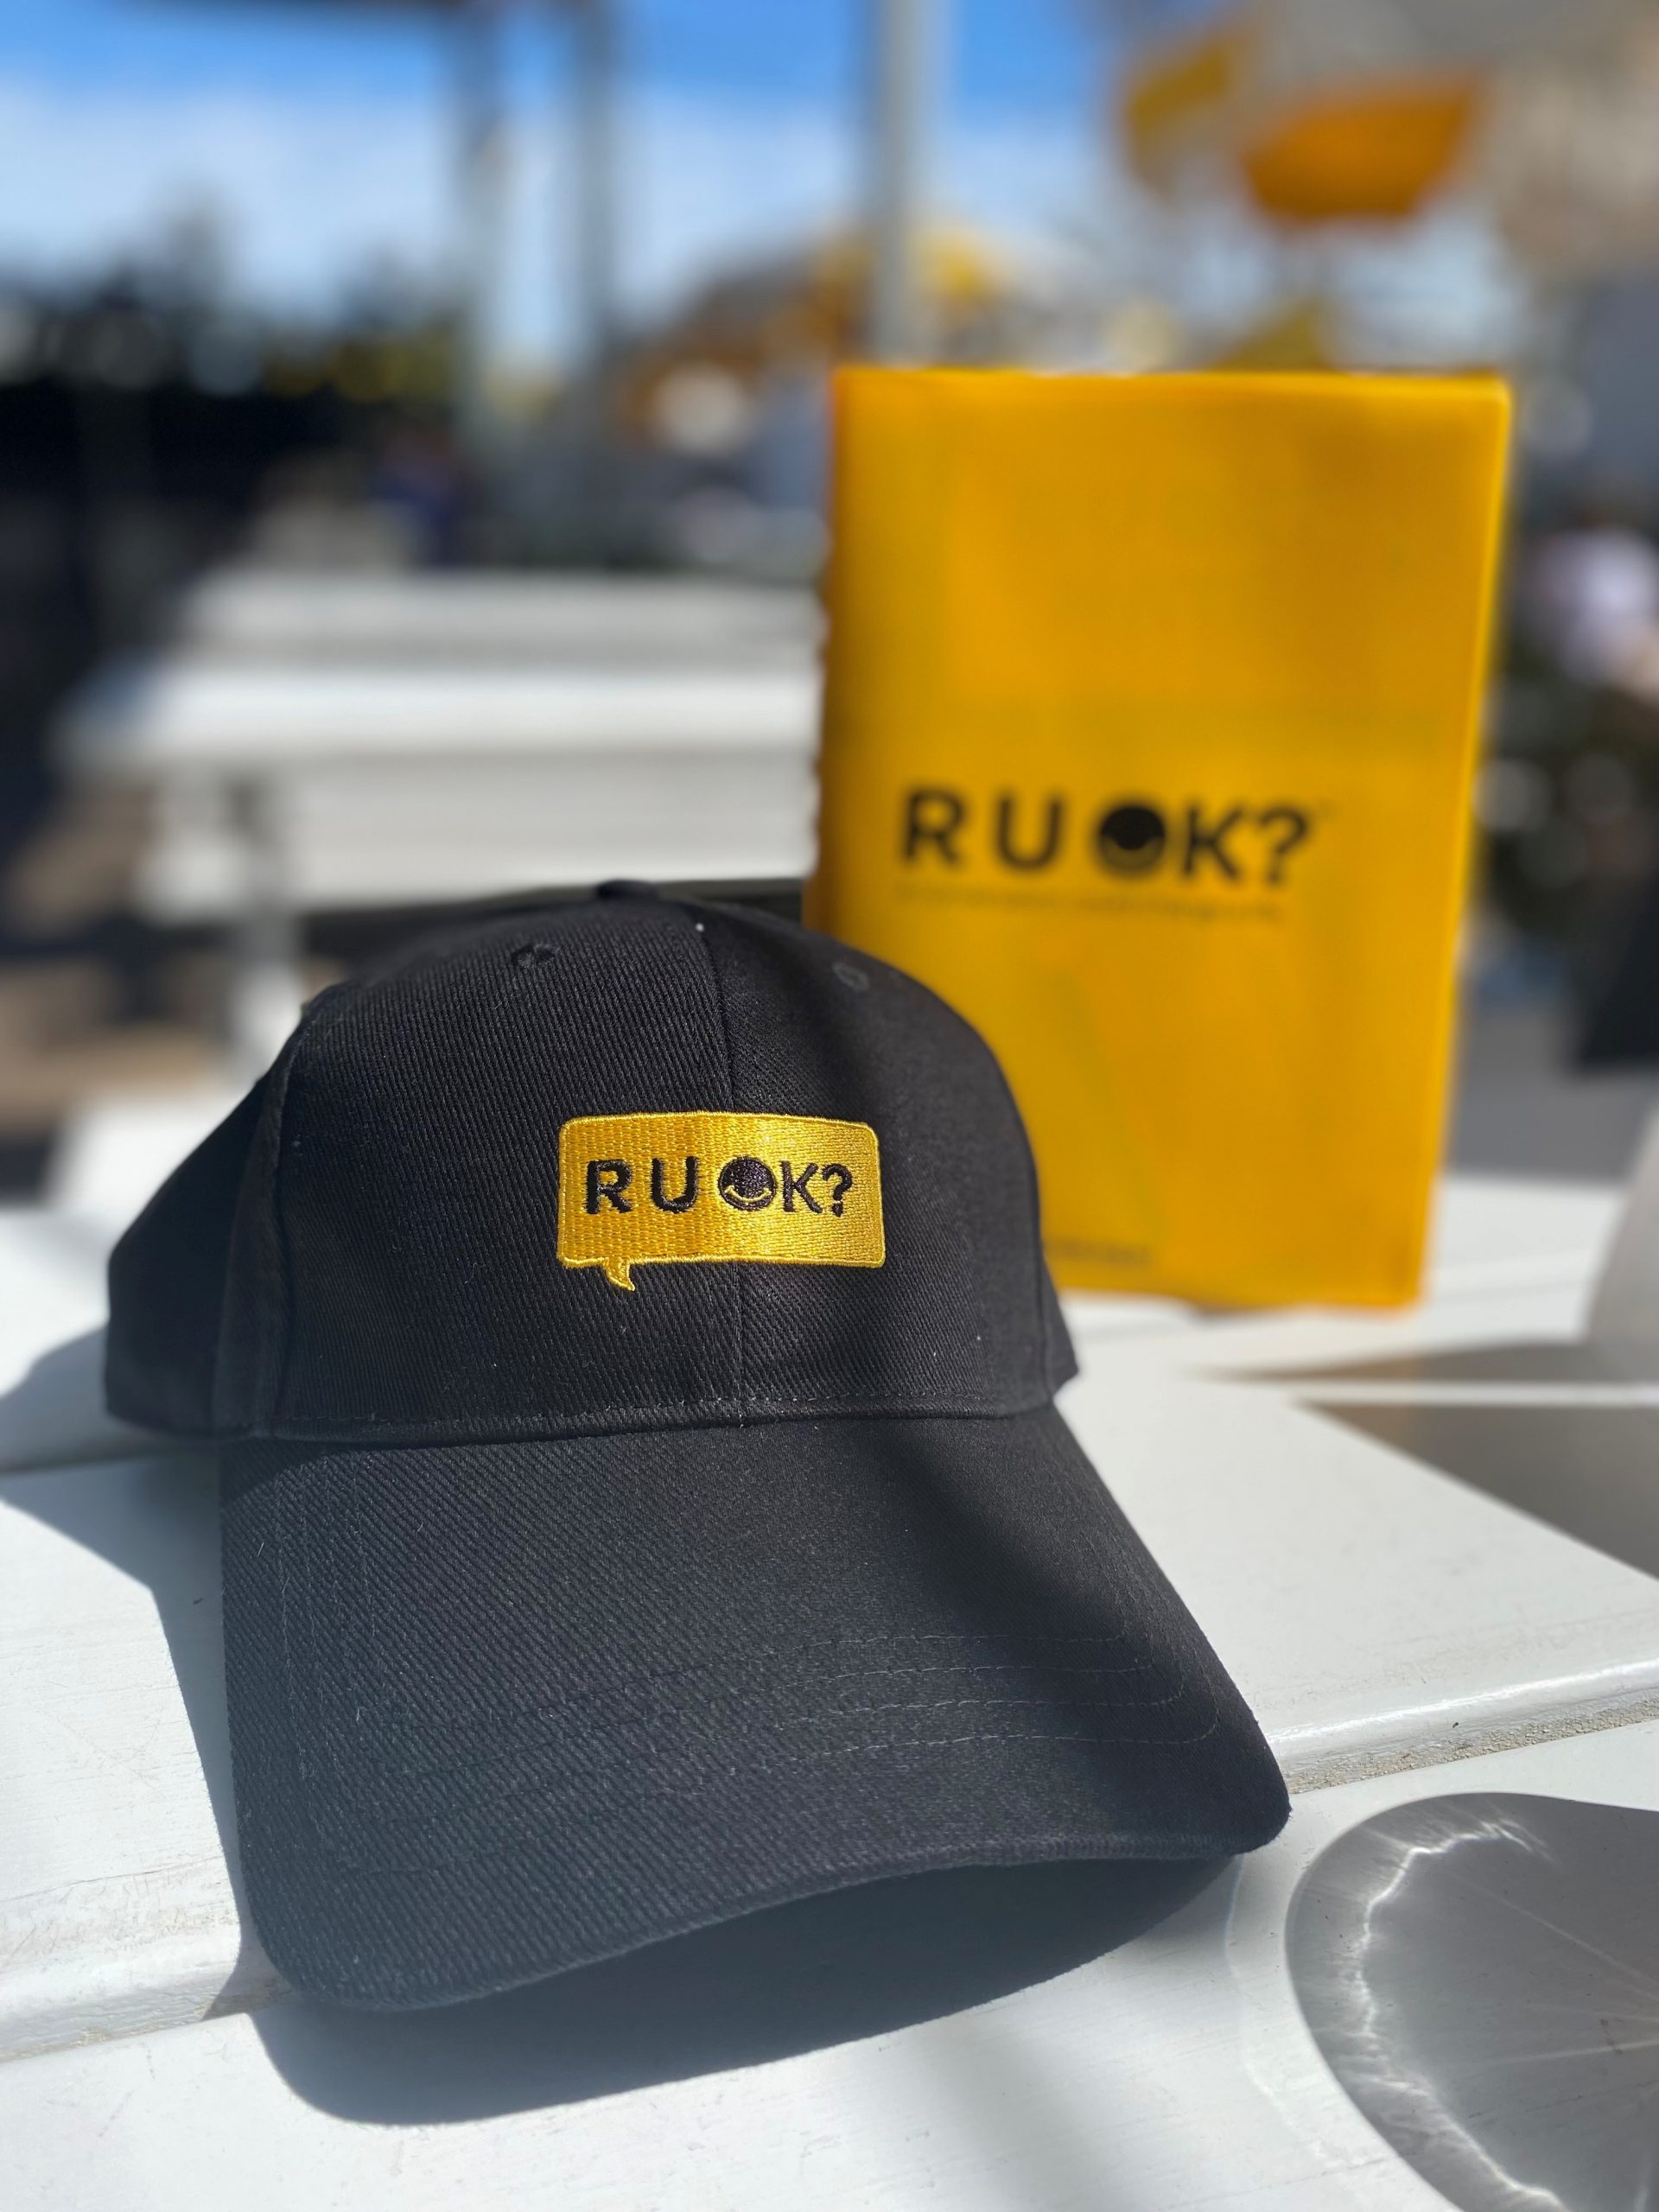 black cap with R U OK? written on it in yellow text